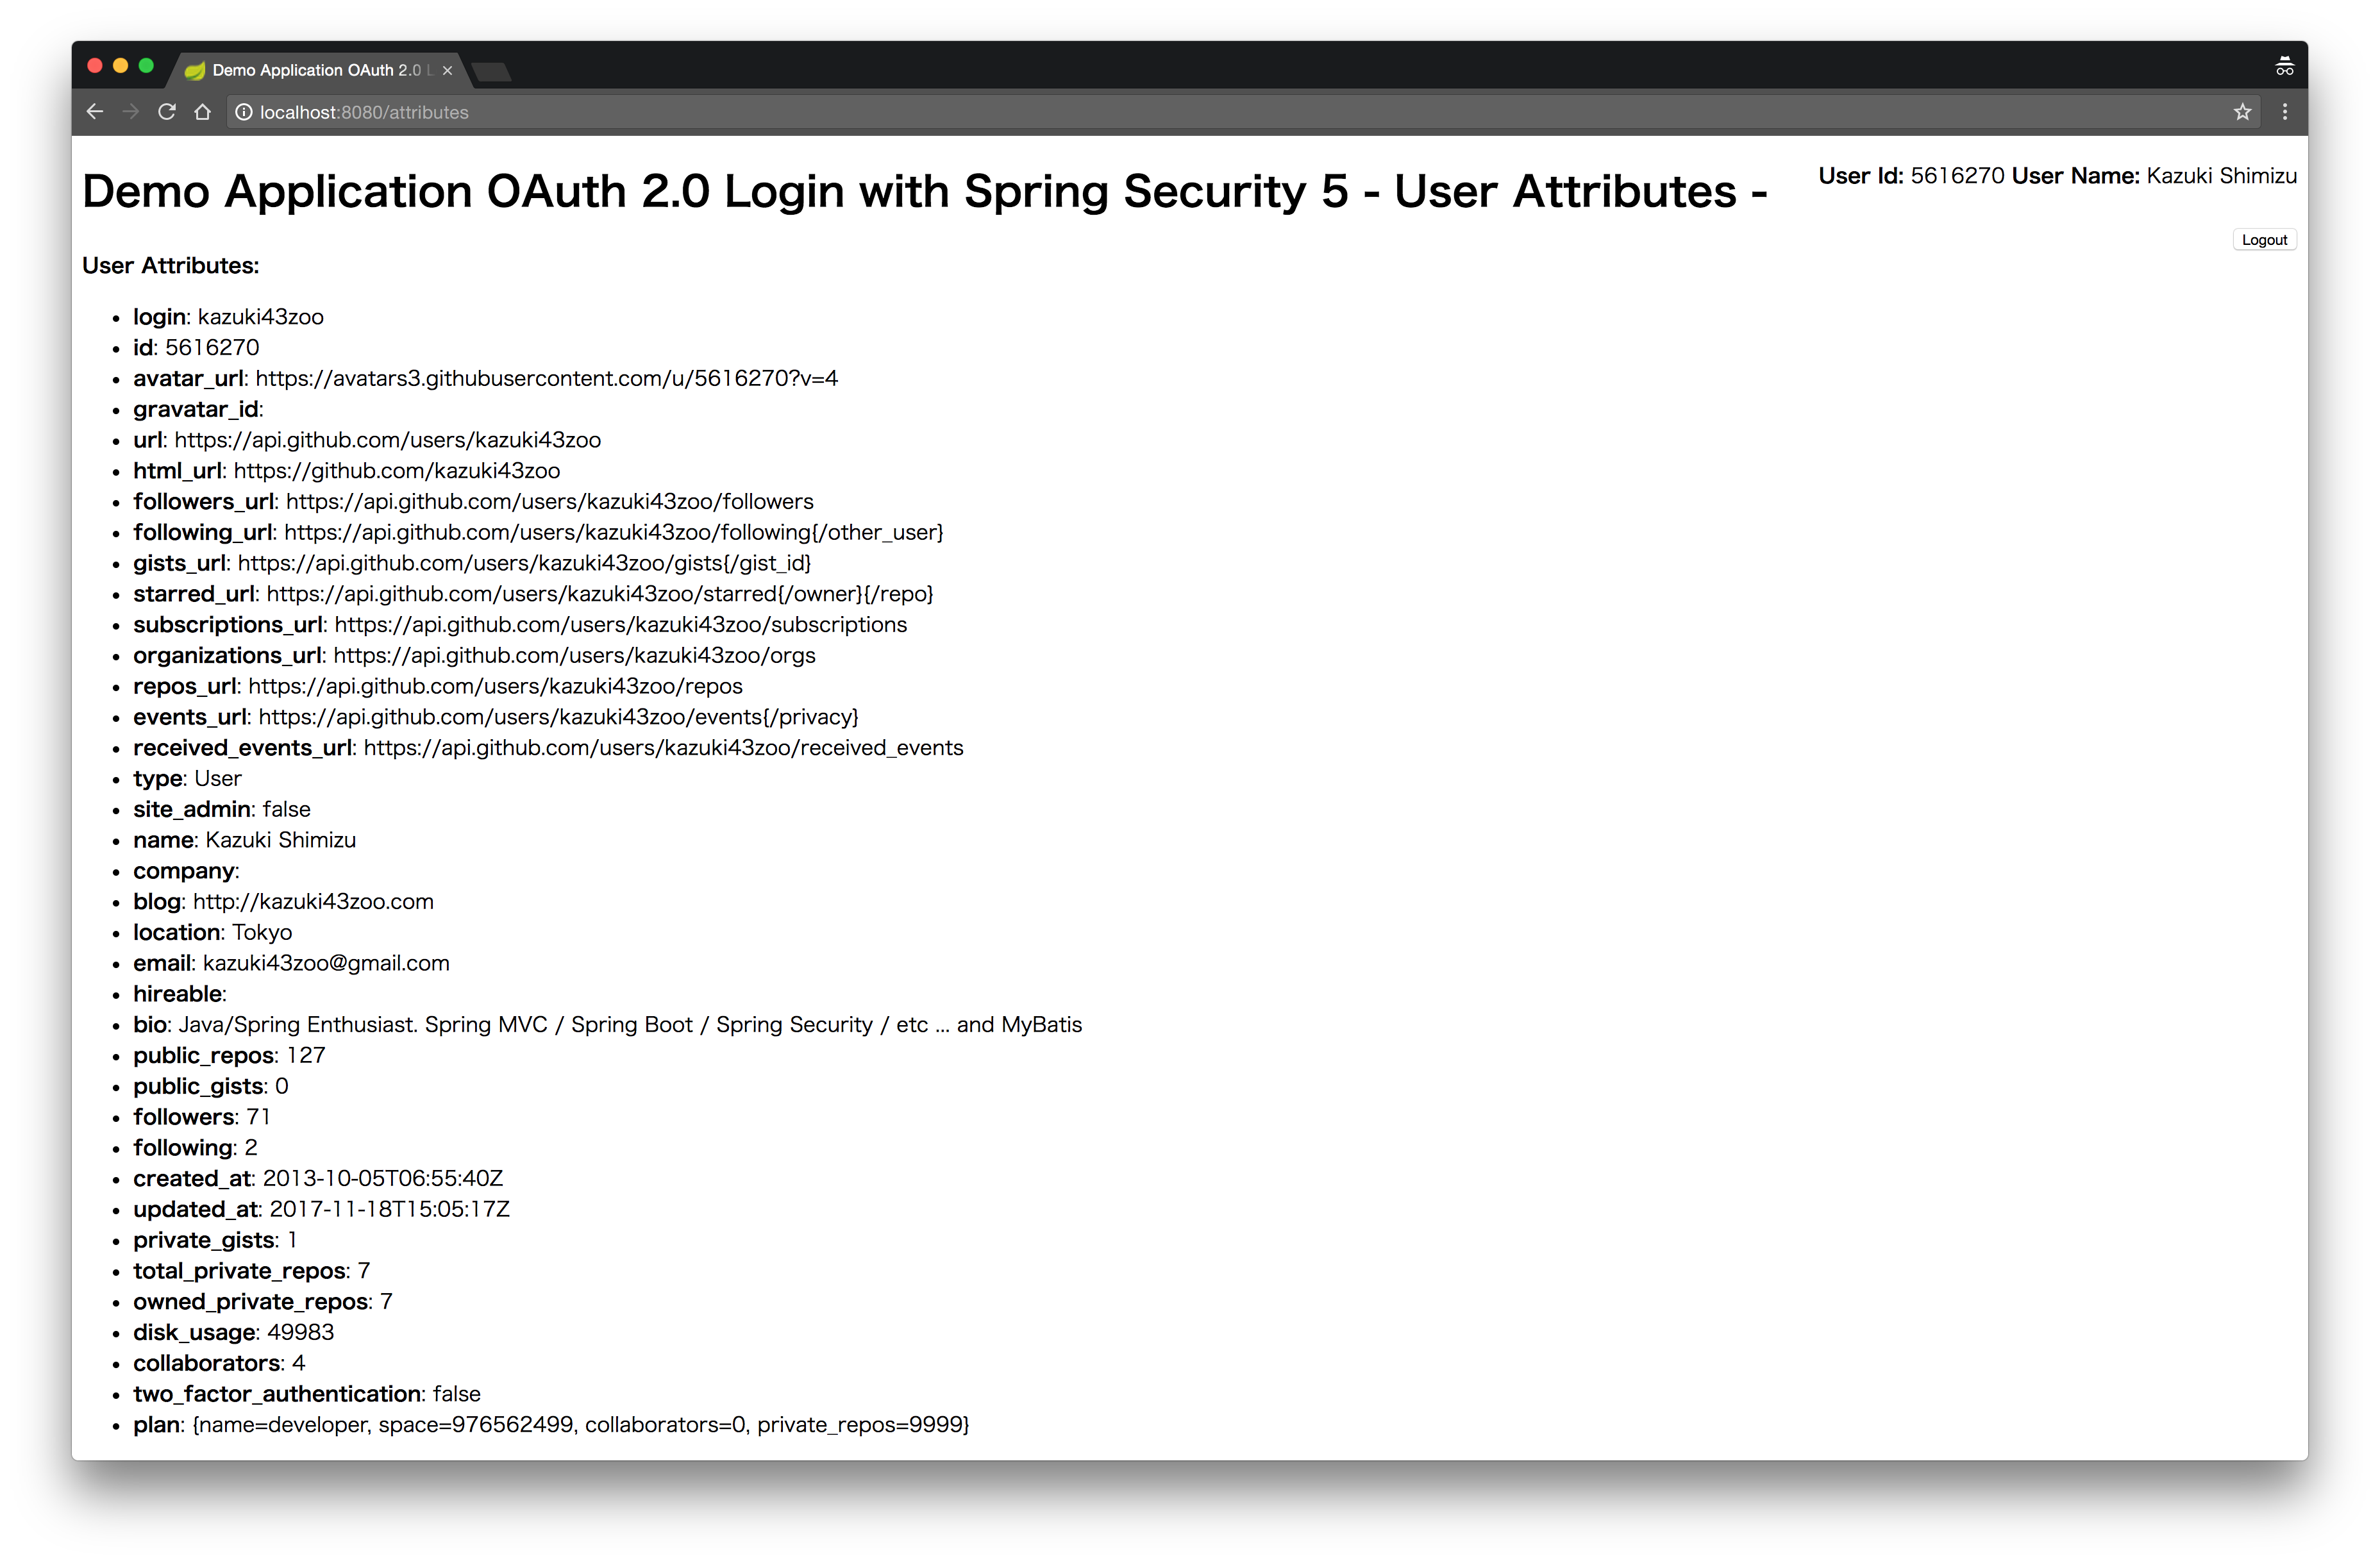 oauth2-attributes-login-page.png